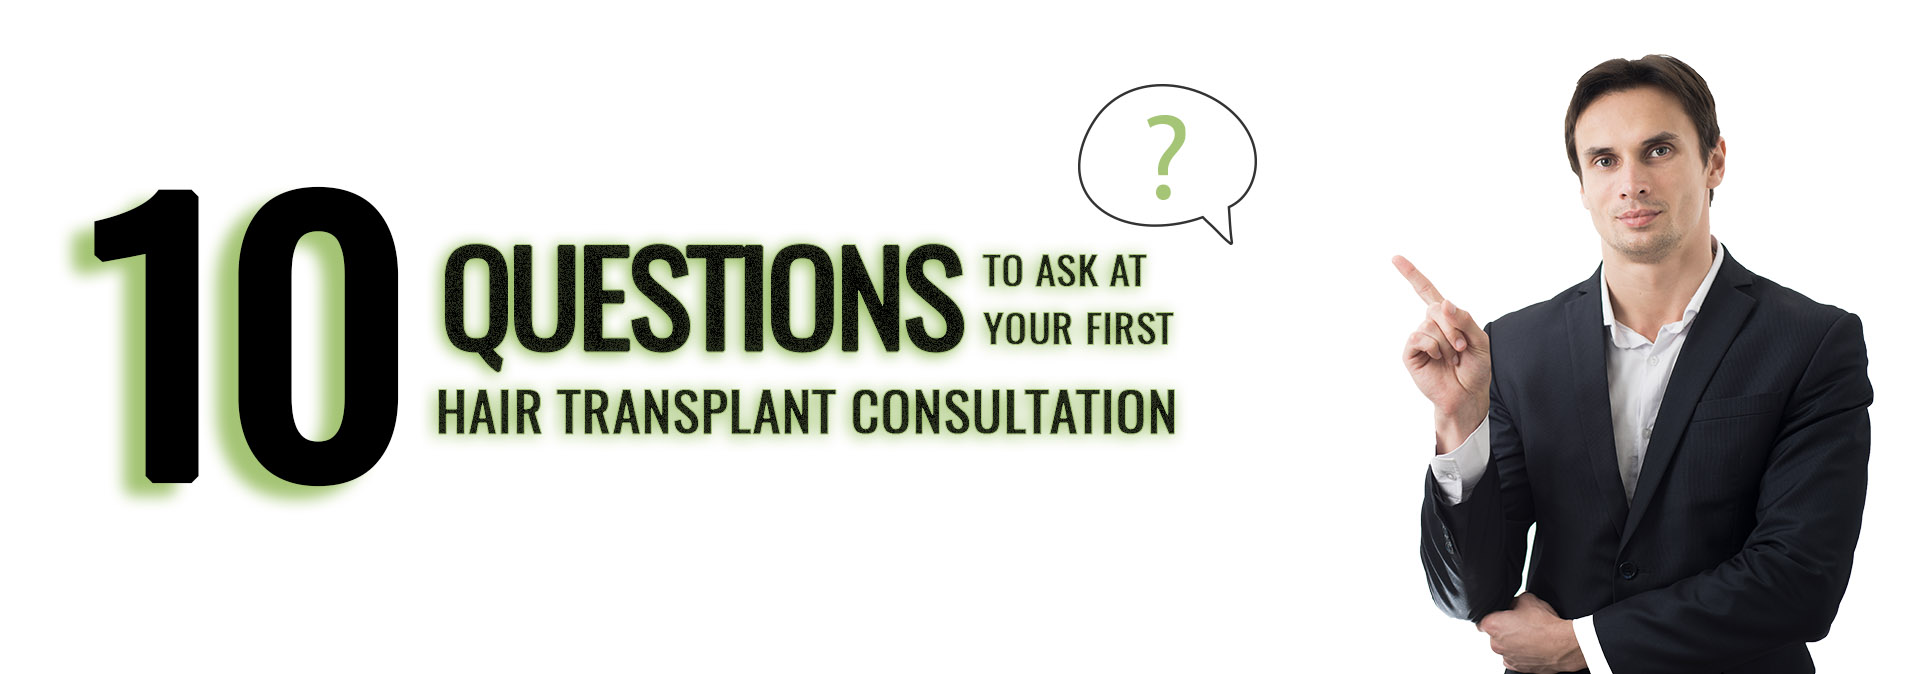 10 questions to ask at your first hair transplant consultation